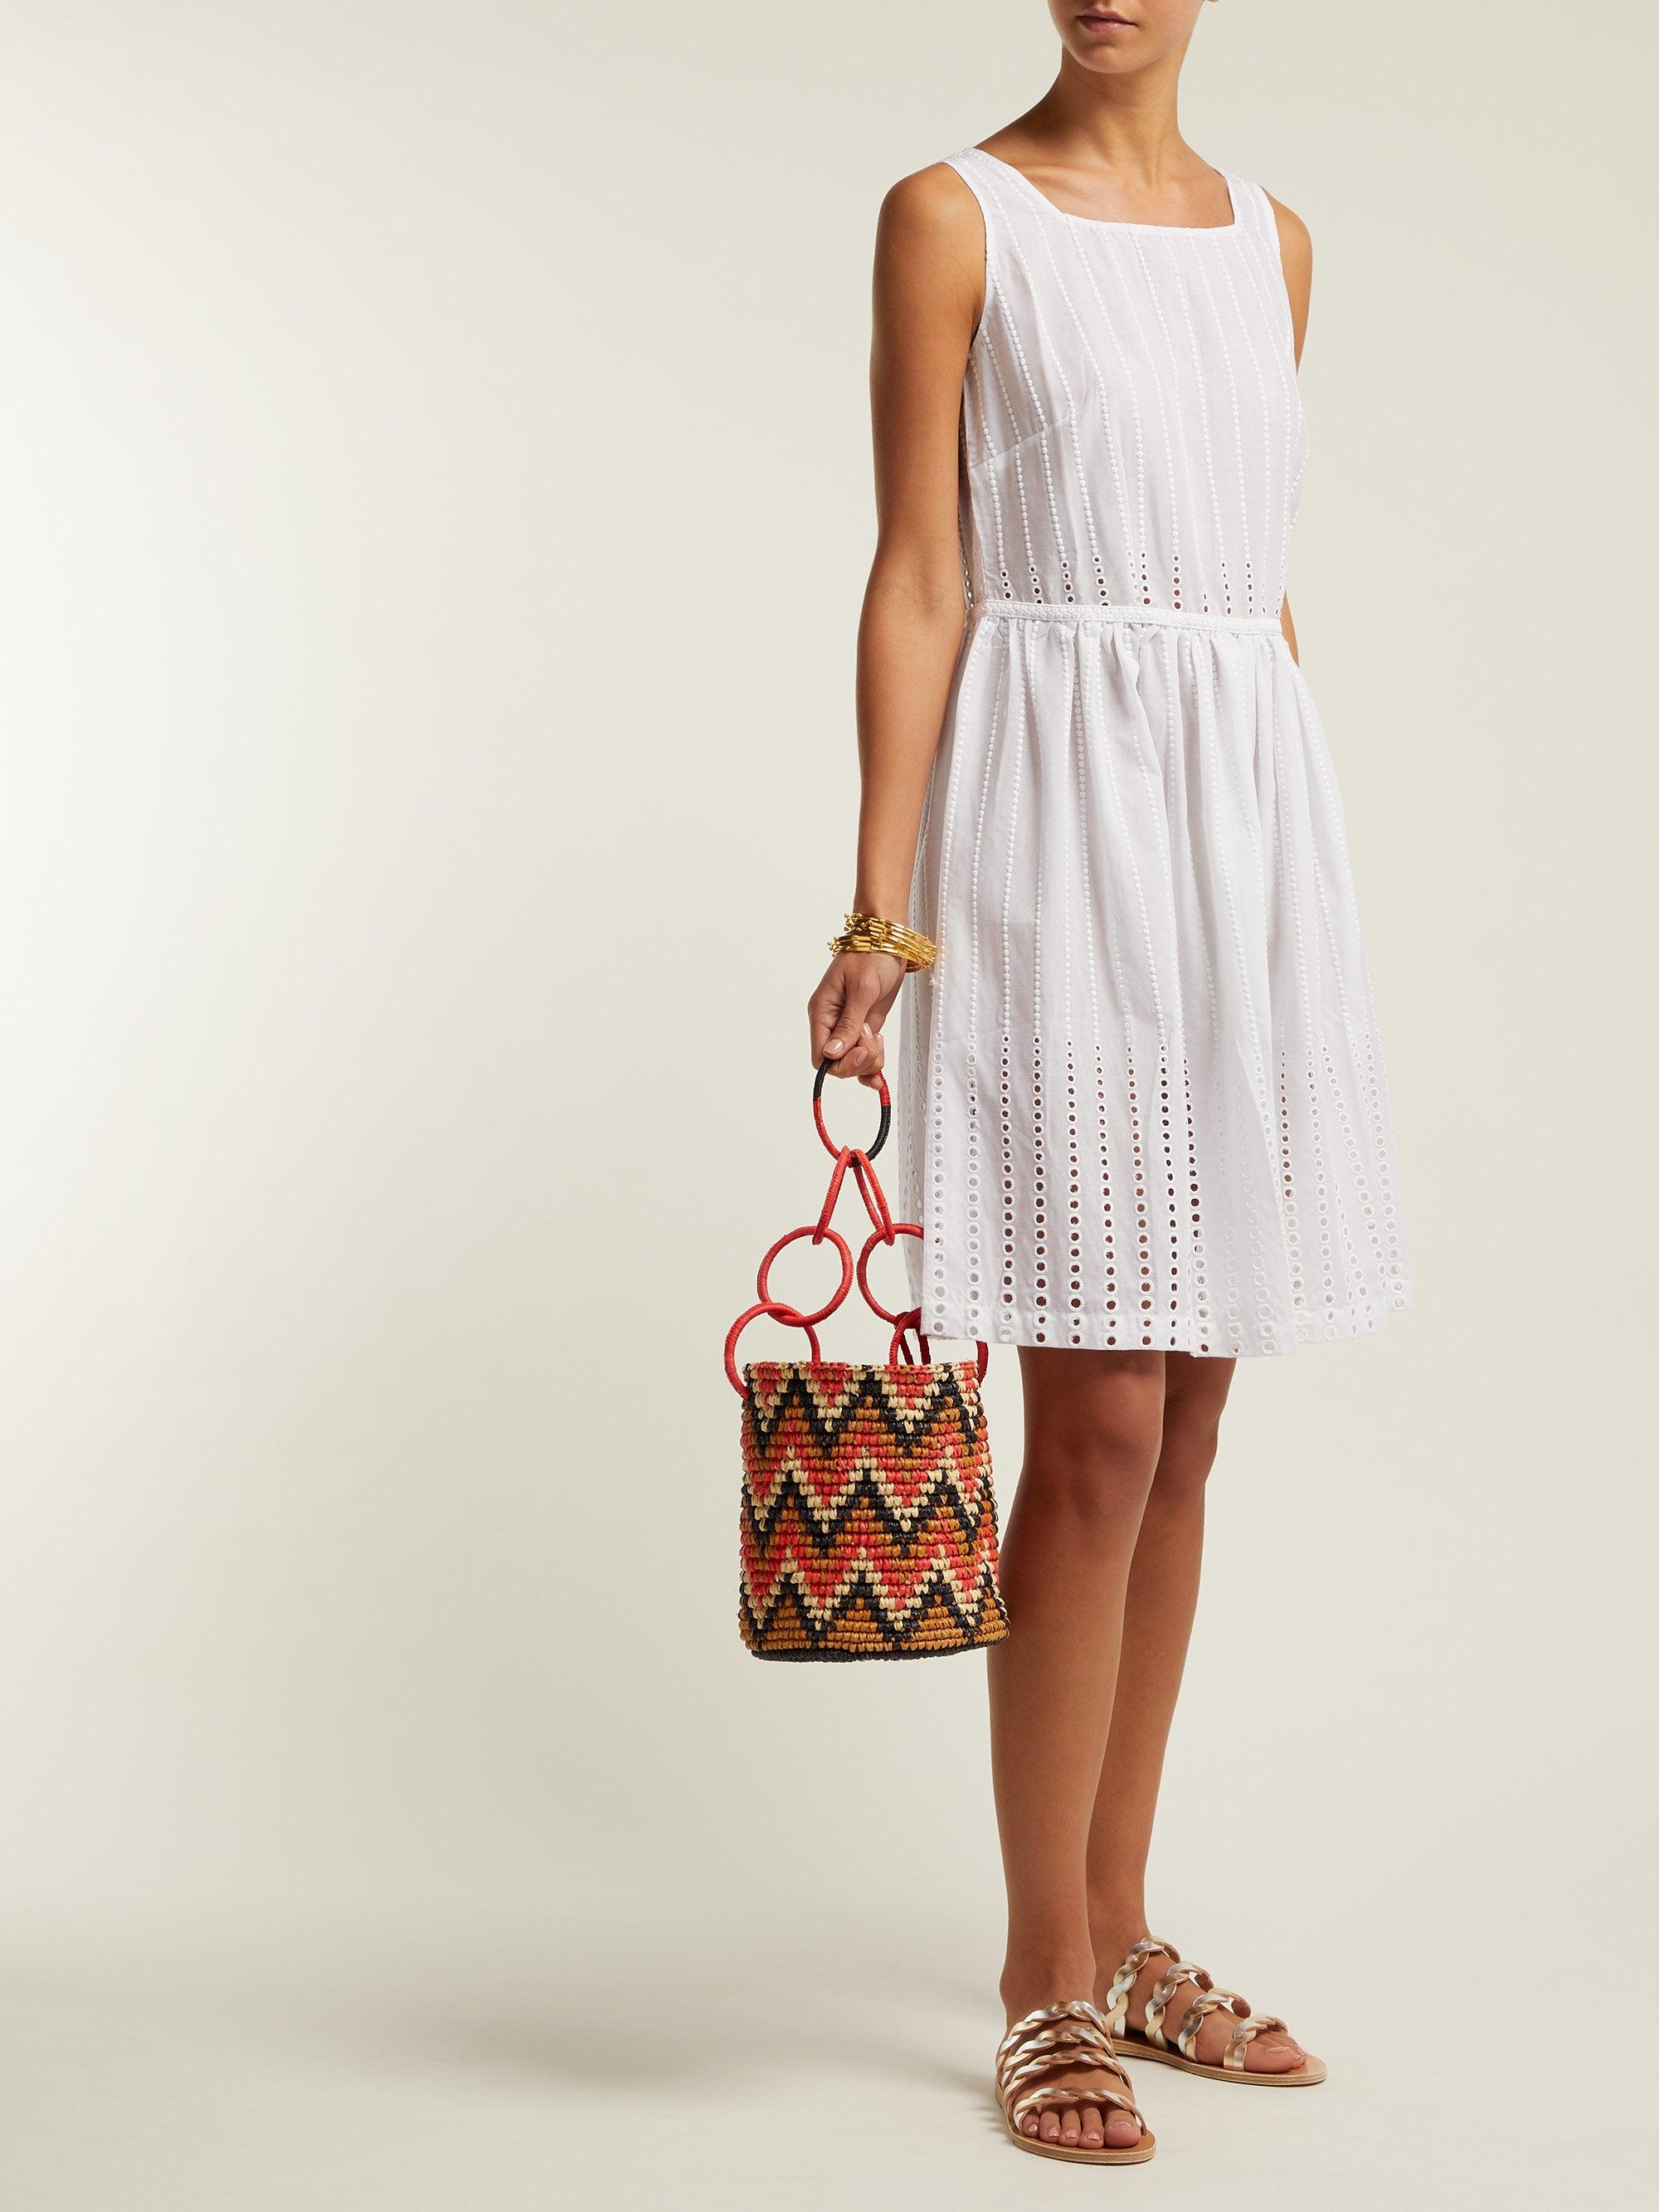 Le Sirenuse Audrie Broderie-anglaise Dress in White - Lyst